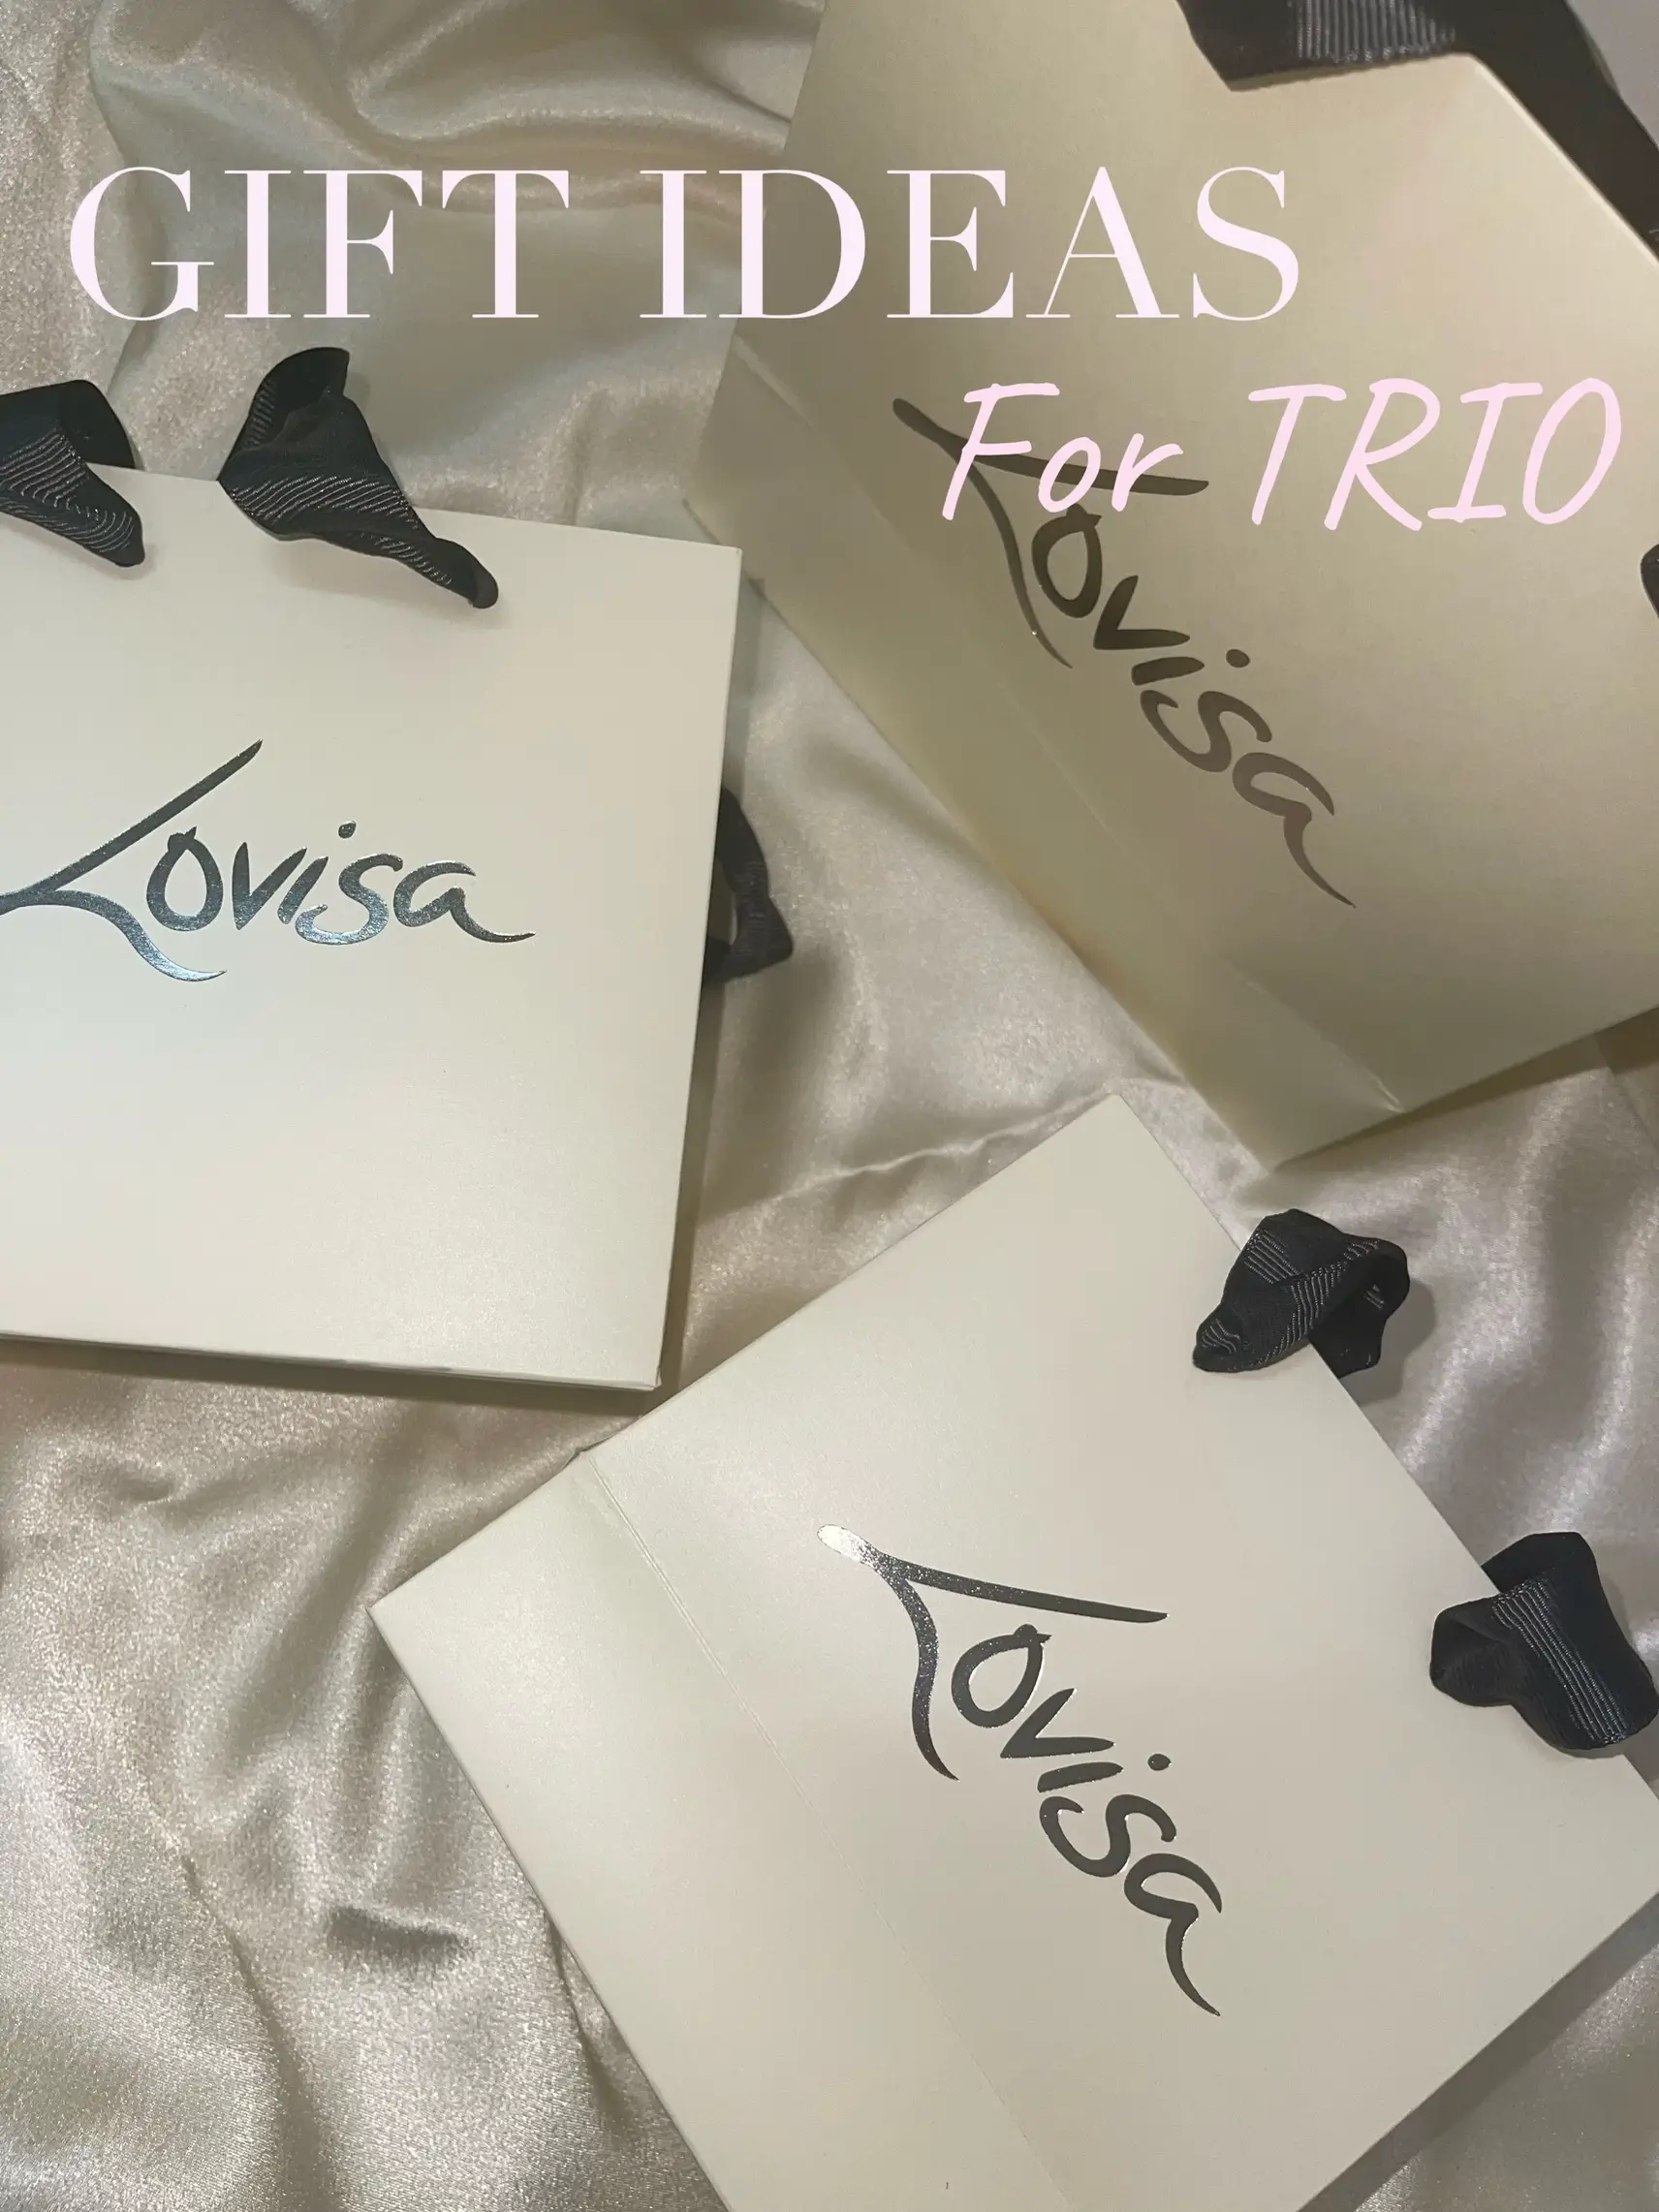 There's a gift for everyone at Lovisa. Who are you buying for? 🎁🤩❤️